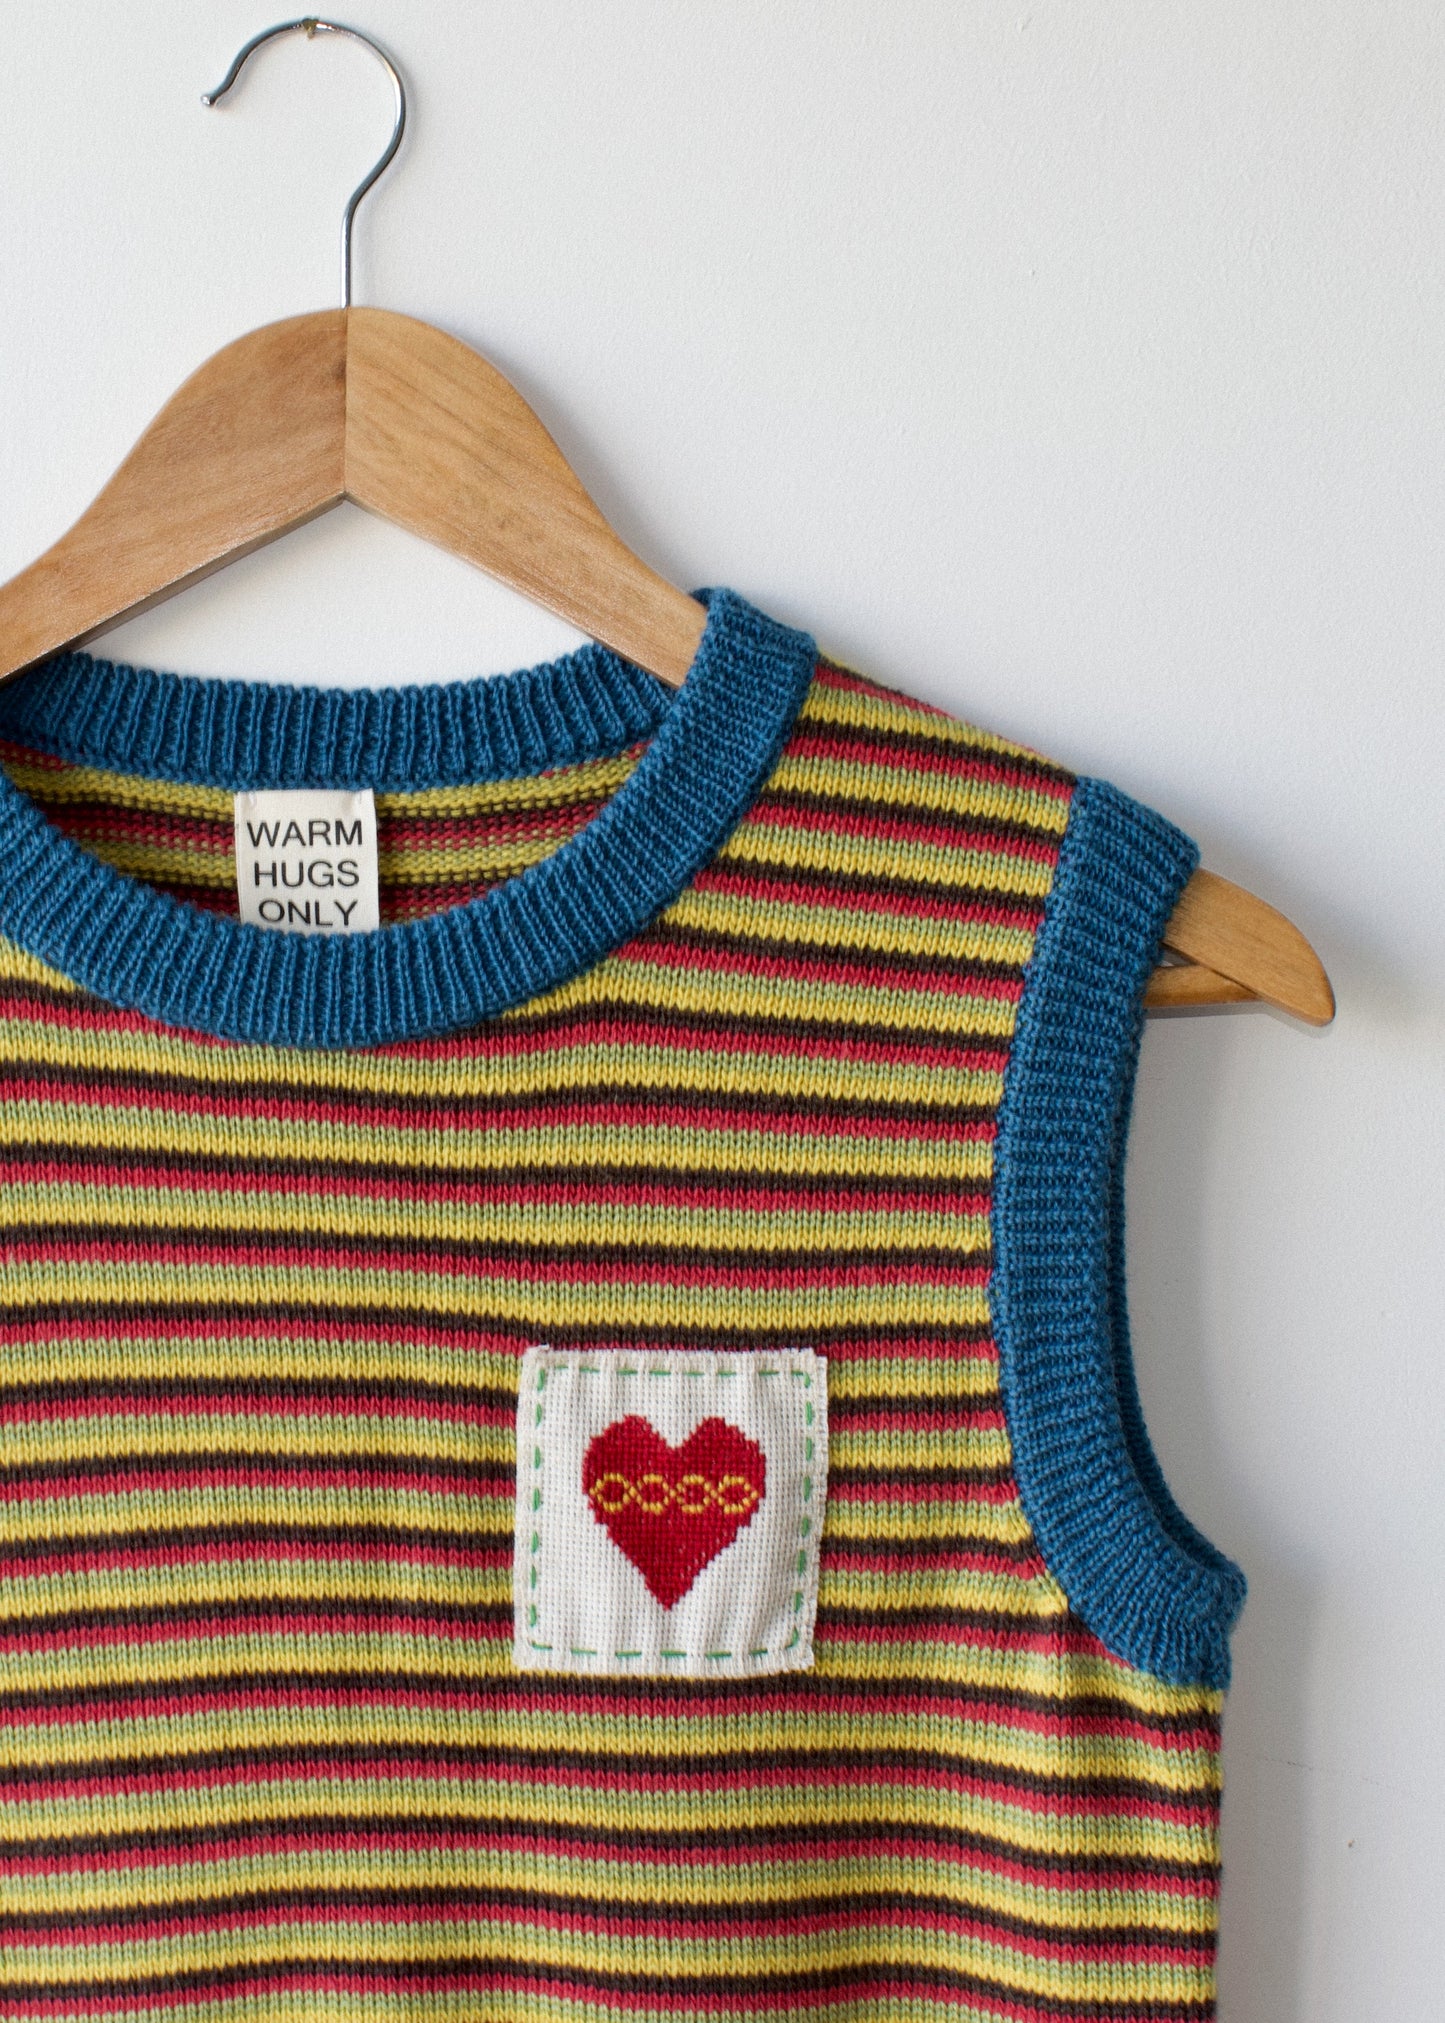 Striped vest with Heart Embroidery <3